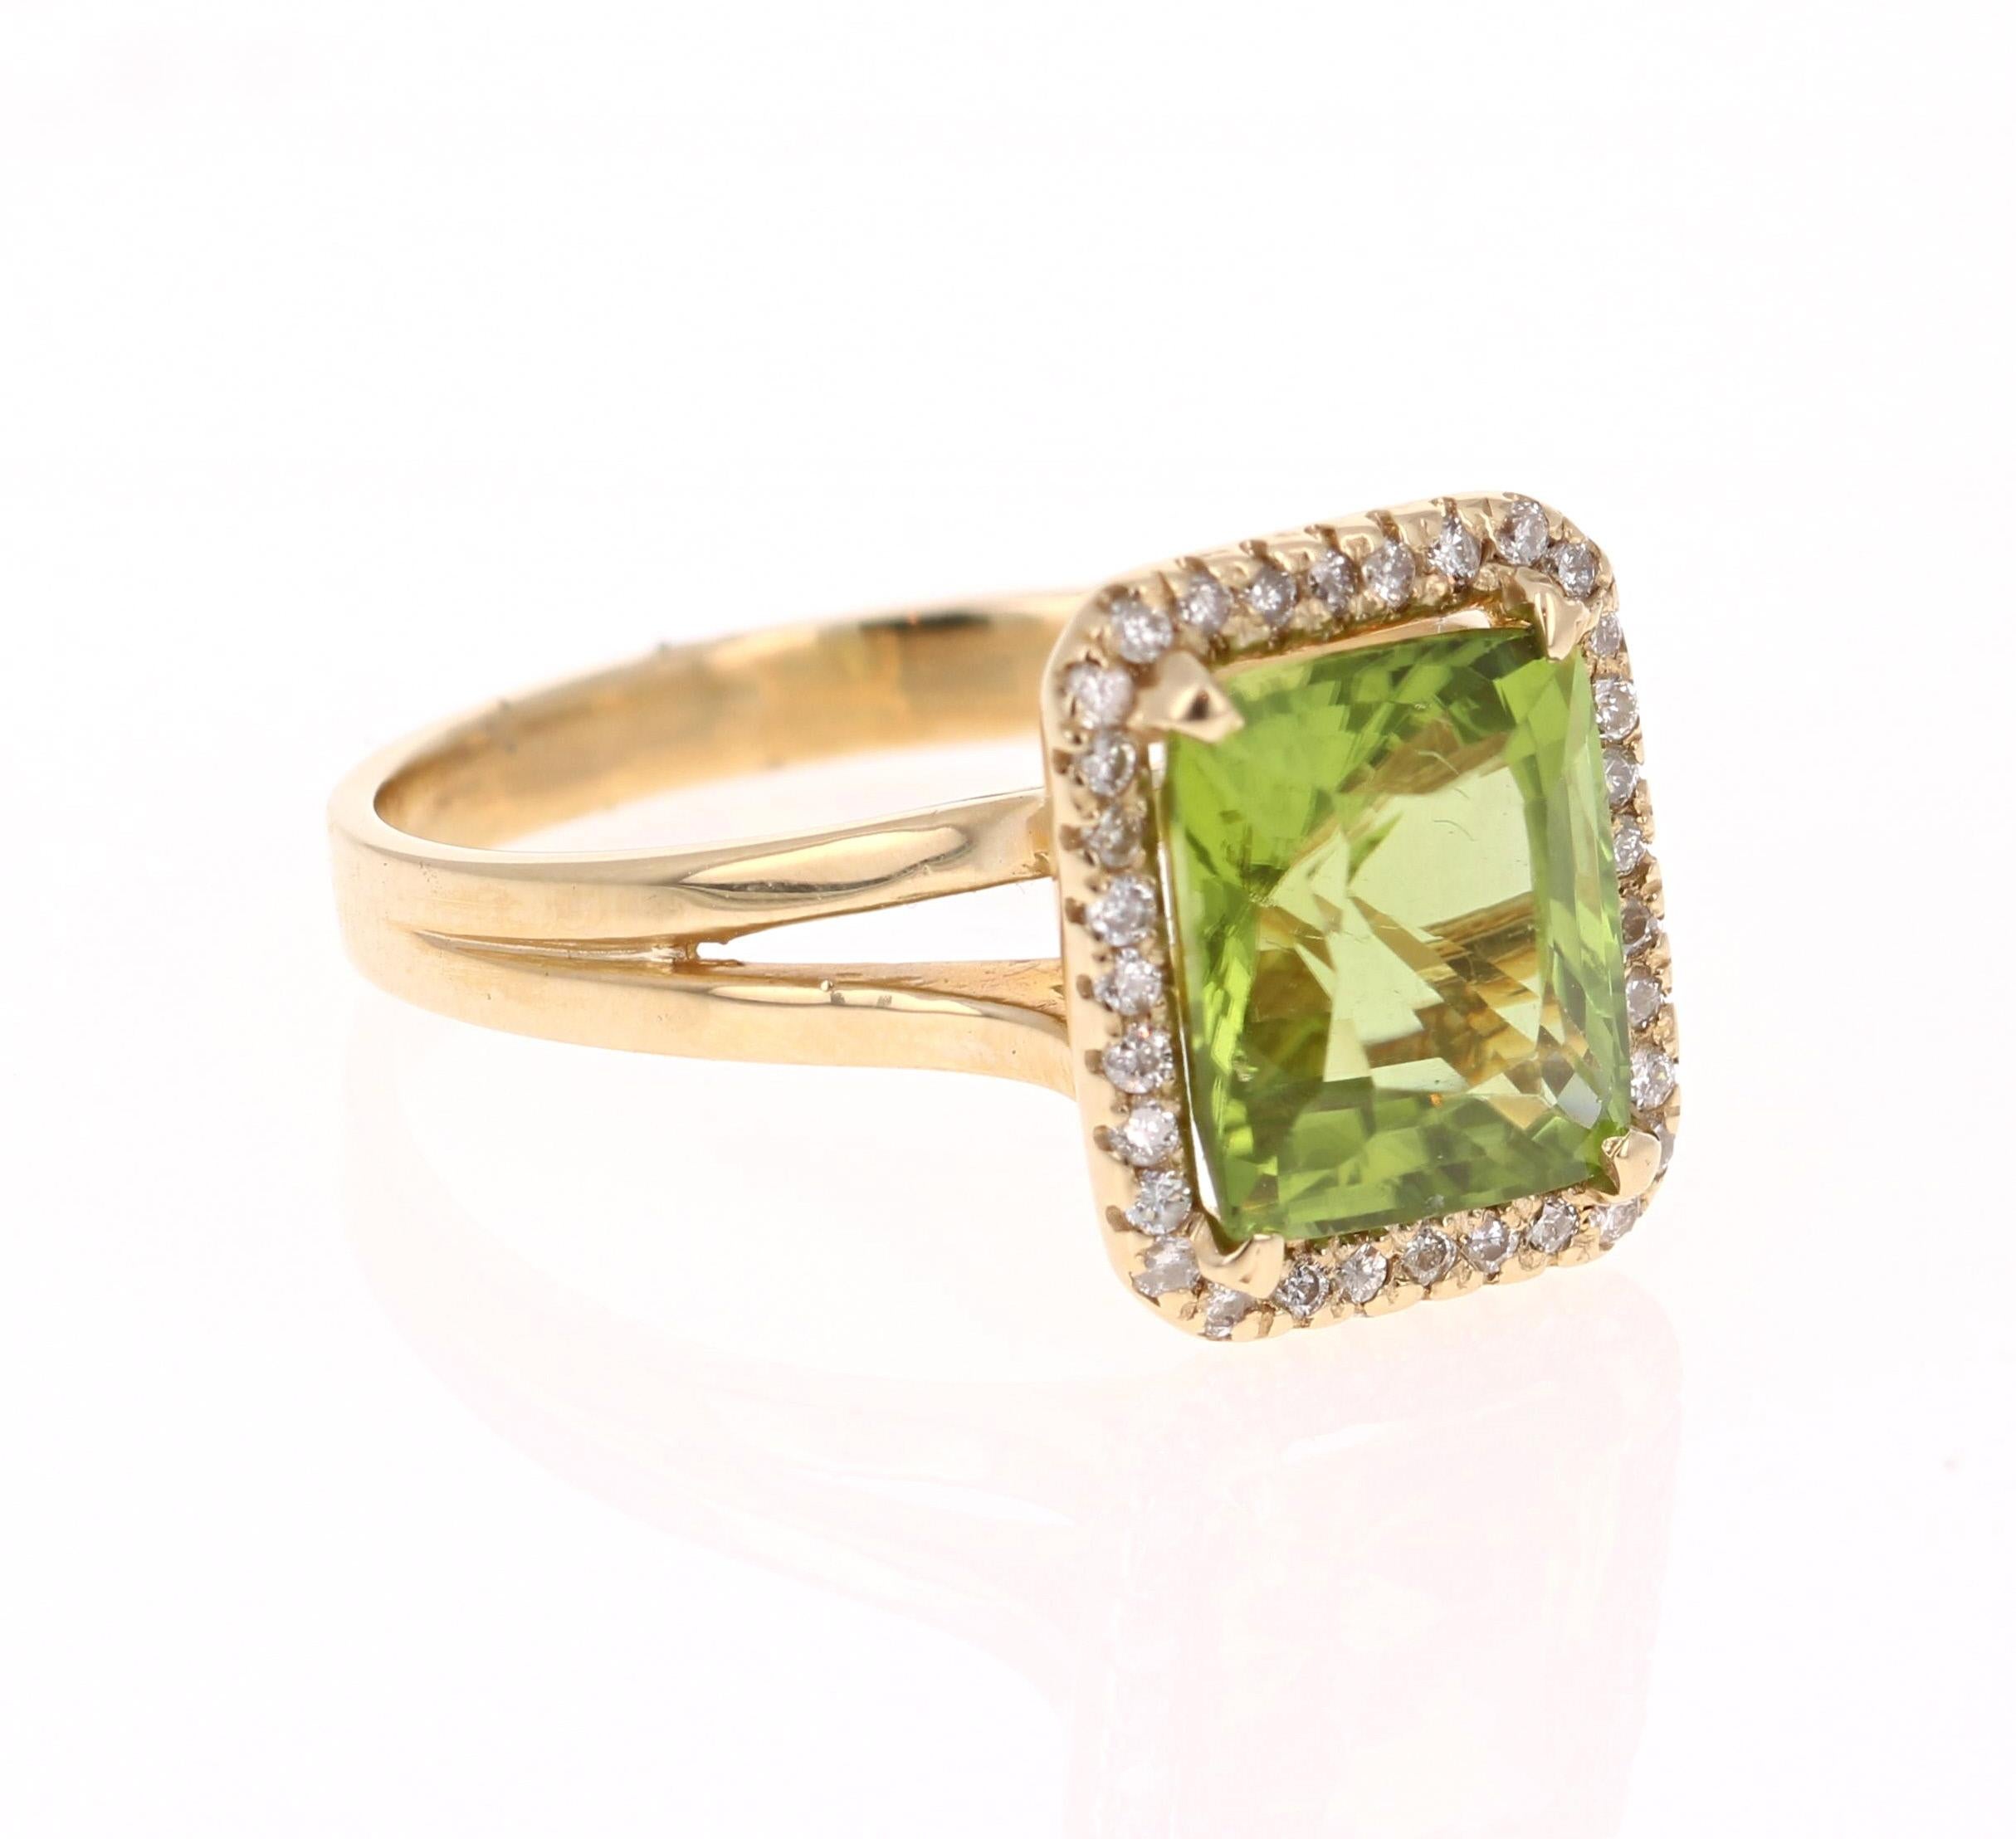 This Peridot and Diamond Ring has a 3.01 Carat Emerald Cut Peridot and has a halo of 32 Round Cut Diamonds weighing 0.17 Carats. The total carat weight of the ring is 3.18 Carats. 

It is set in 14 Karat Yellow Gold and weighs approximate 3.2 grams.